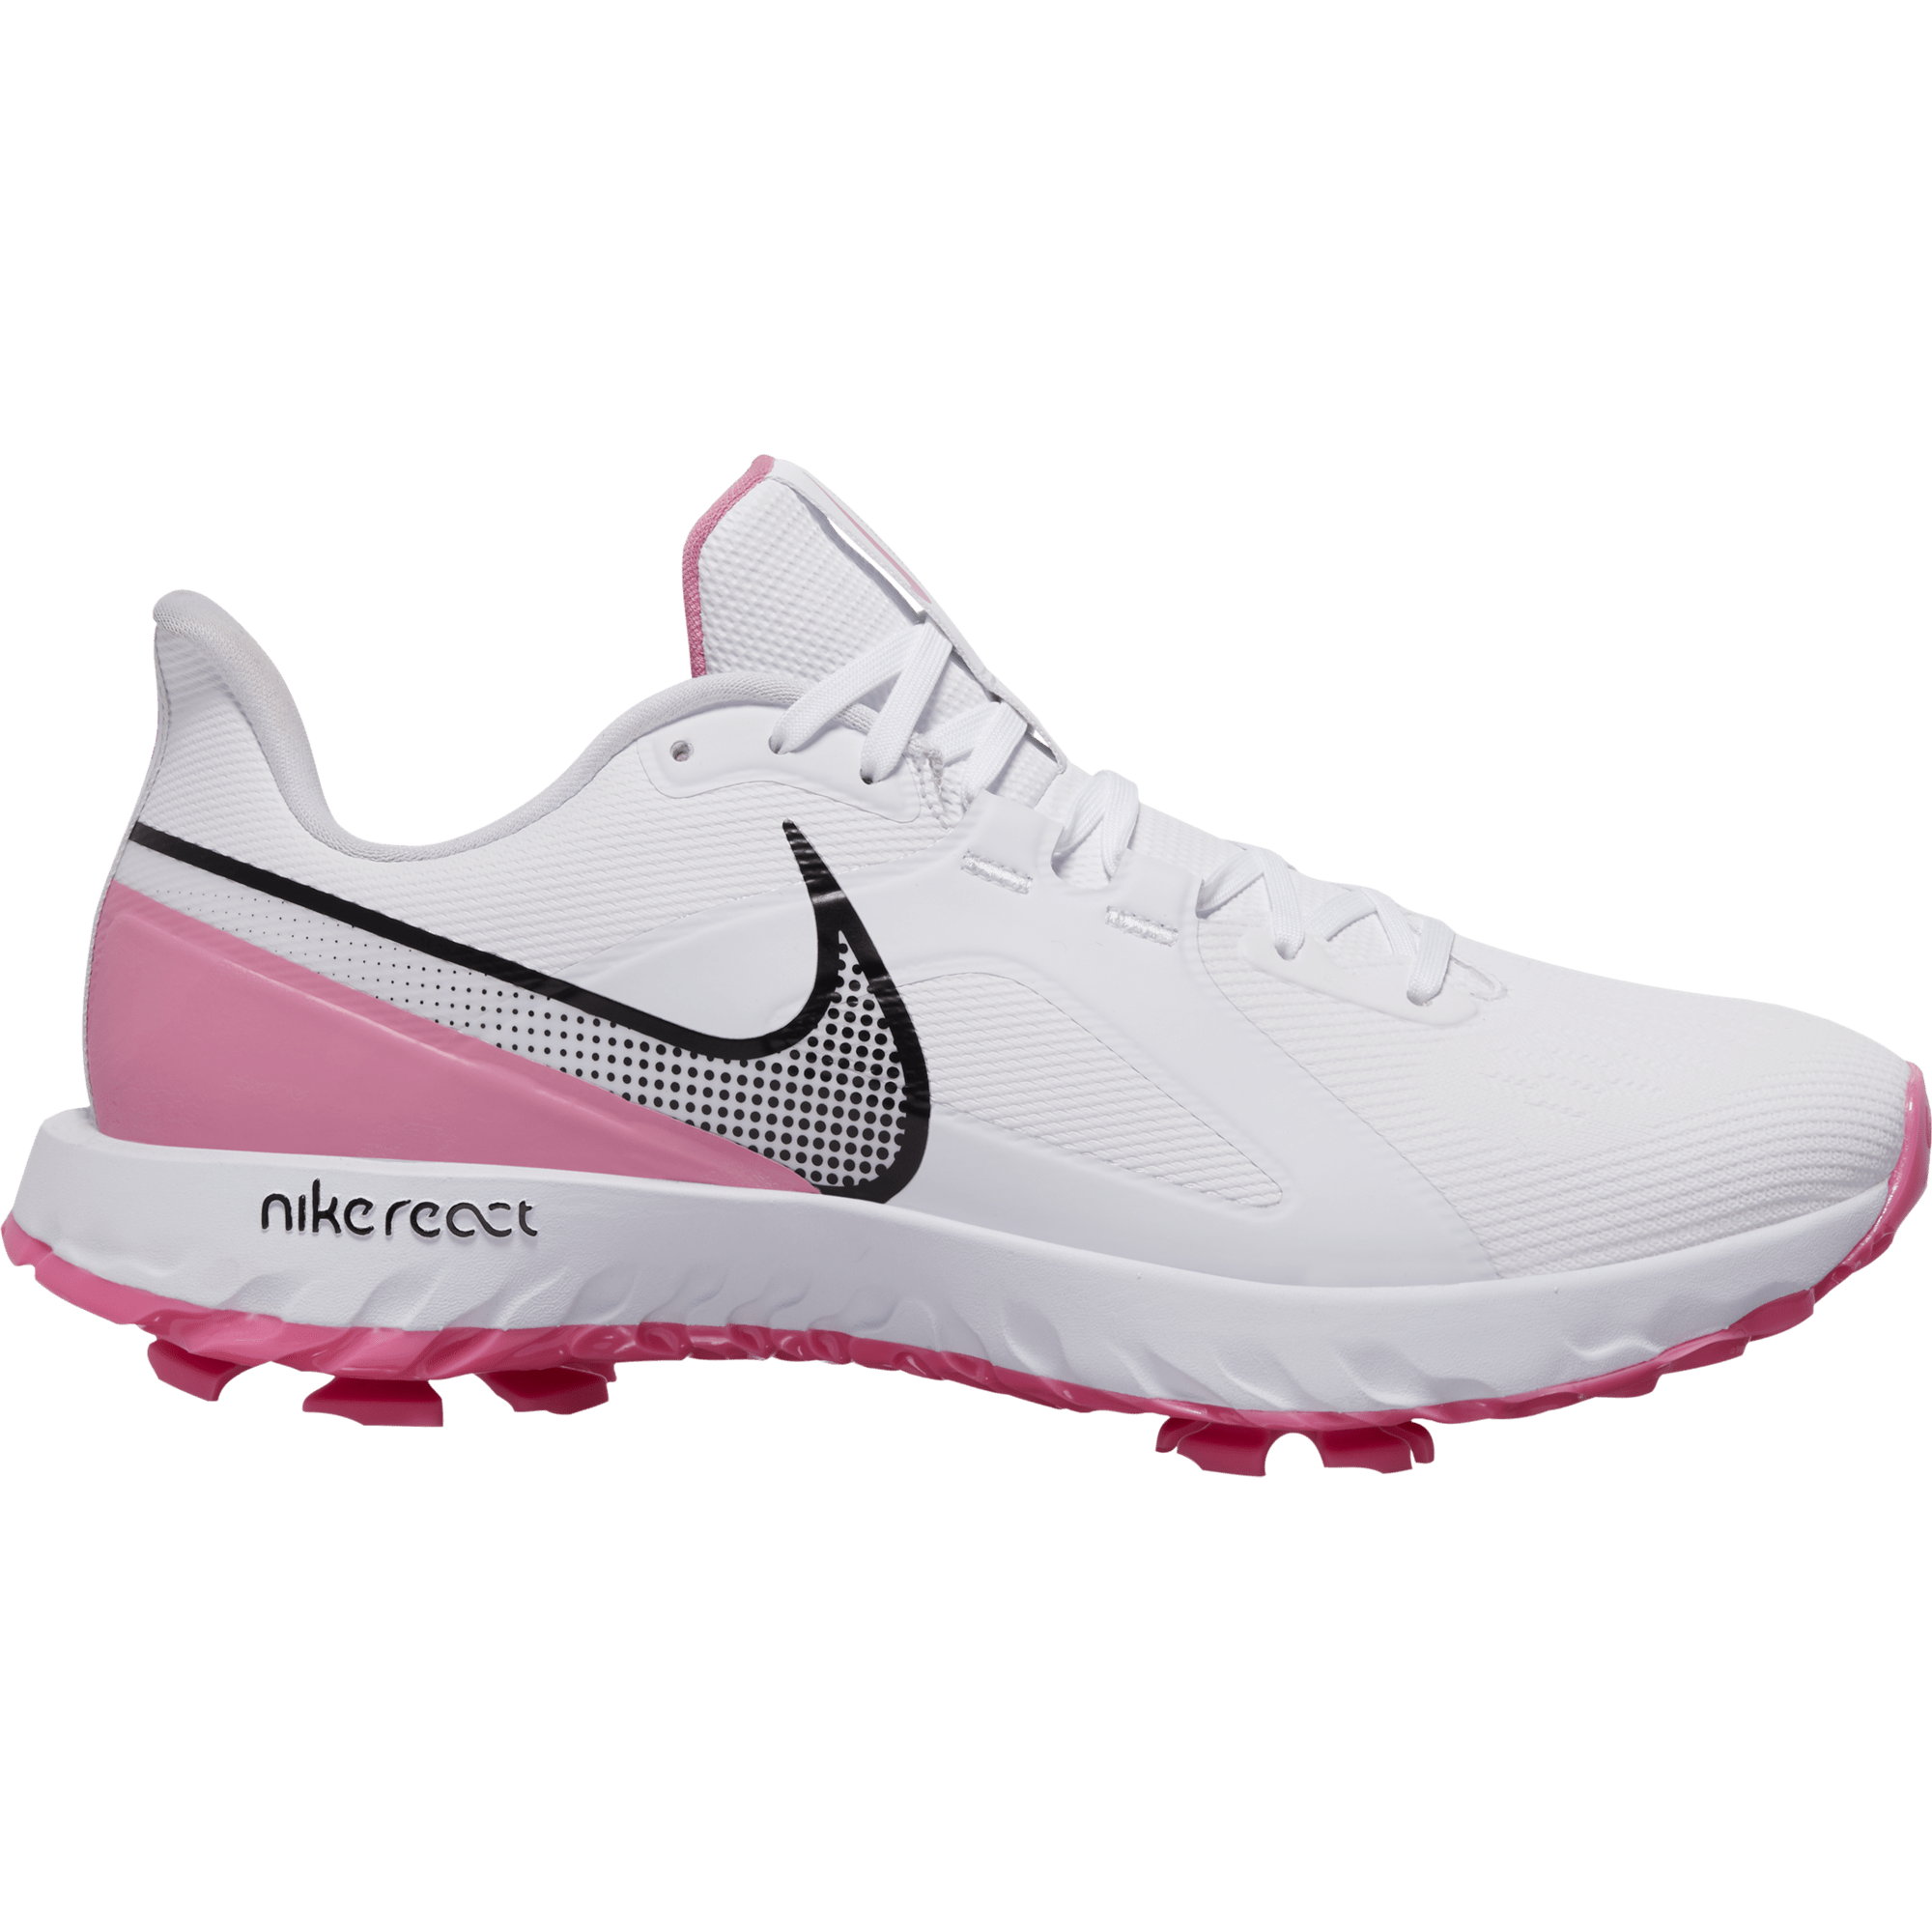 nike golf shoes pink